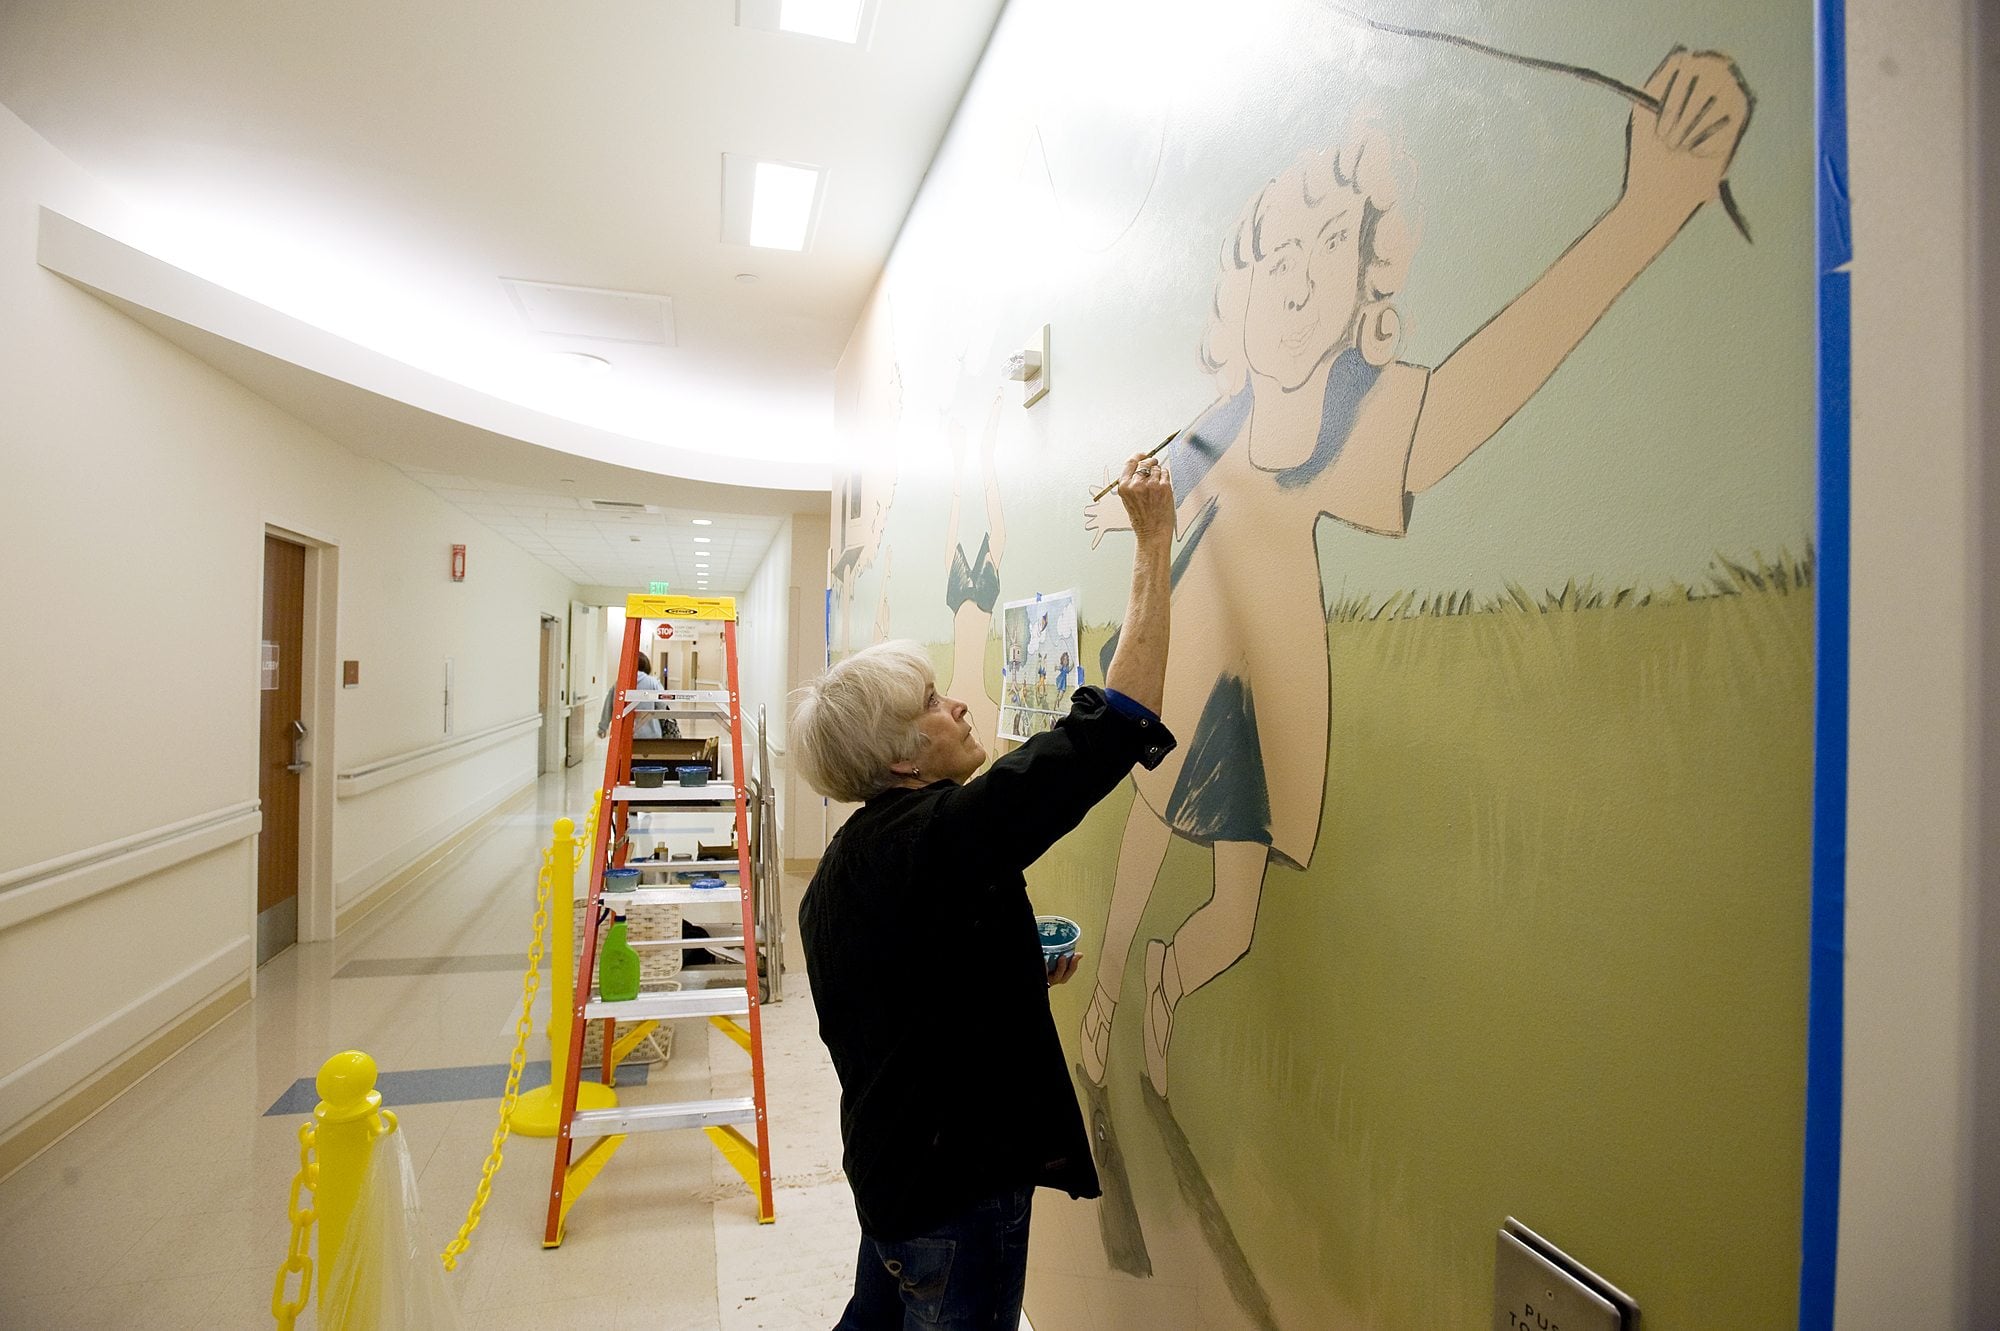 Retired art teacher Rebecca Anstine paints a mural Thursday at the entrance of the pediatric emergency department at Legacy Salmon Creek Medical Center.